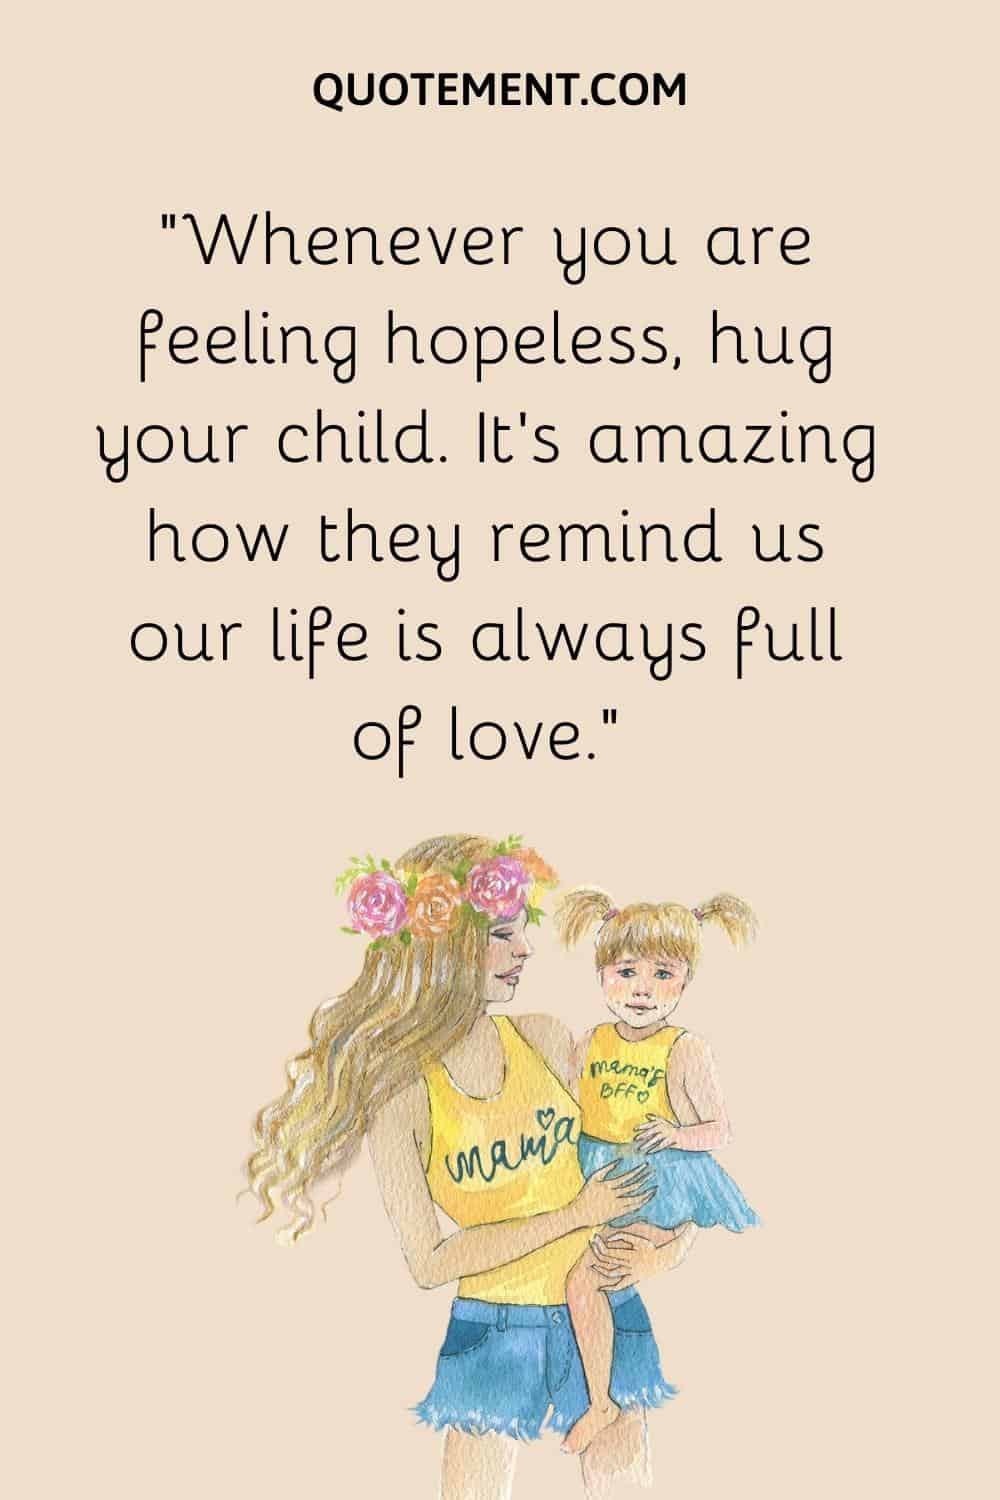 “Whenever you are feeling hopeless, hug your child. It’s amazing how they remind us our life is always full of love.”